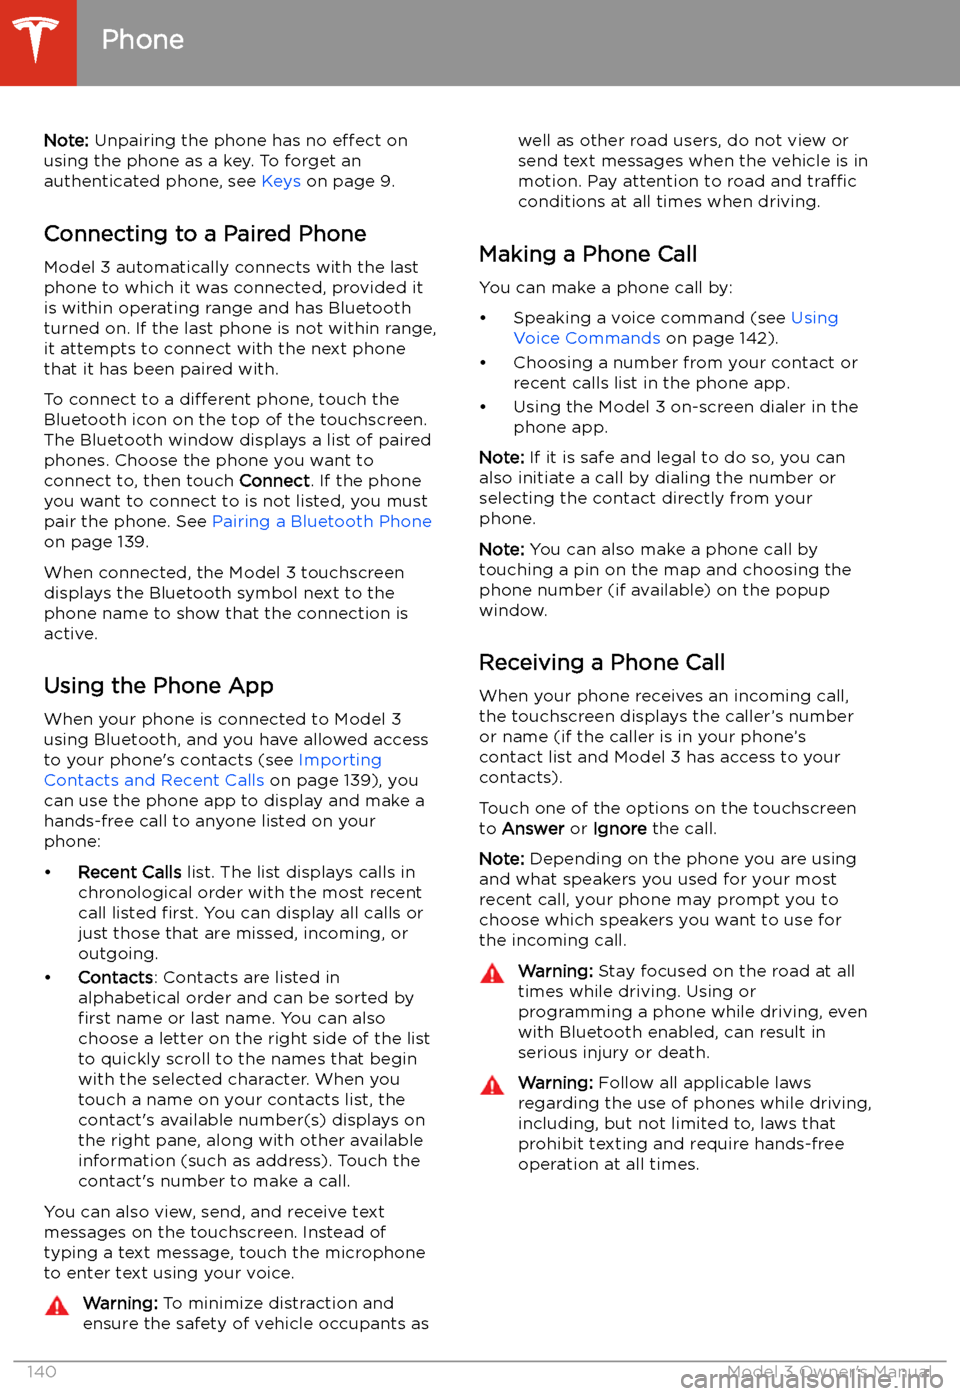 TESLA MODEL 3 2020  Owners Manuals Note: Unpairing the phone has no  effect on
using the phone as a key. To forget an
authenticated phone, see  Keys on page 9.
Connecting to a Paired Phone
Model 3 automatically connects with the last
p